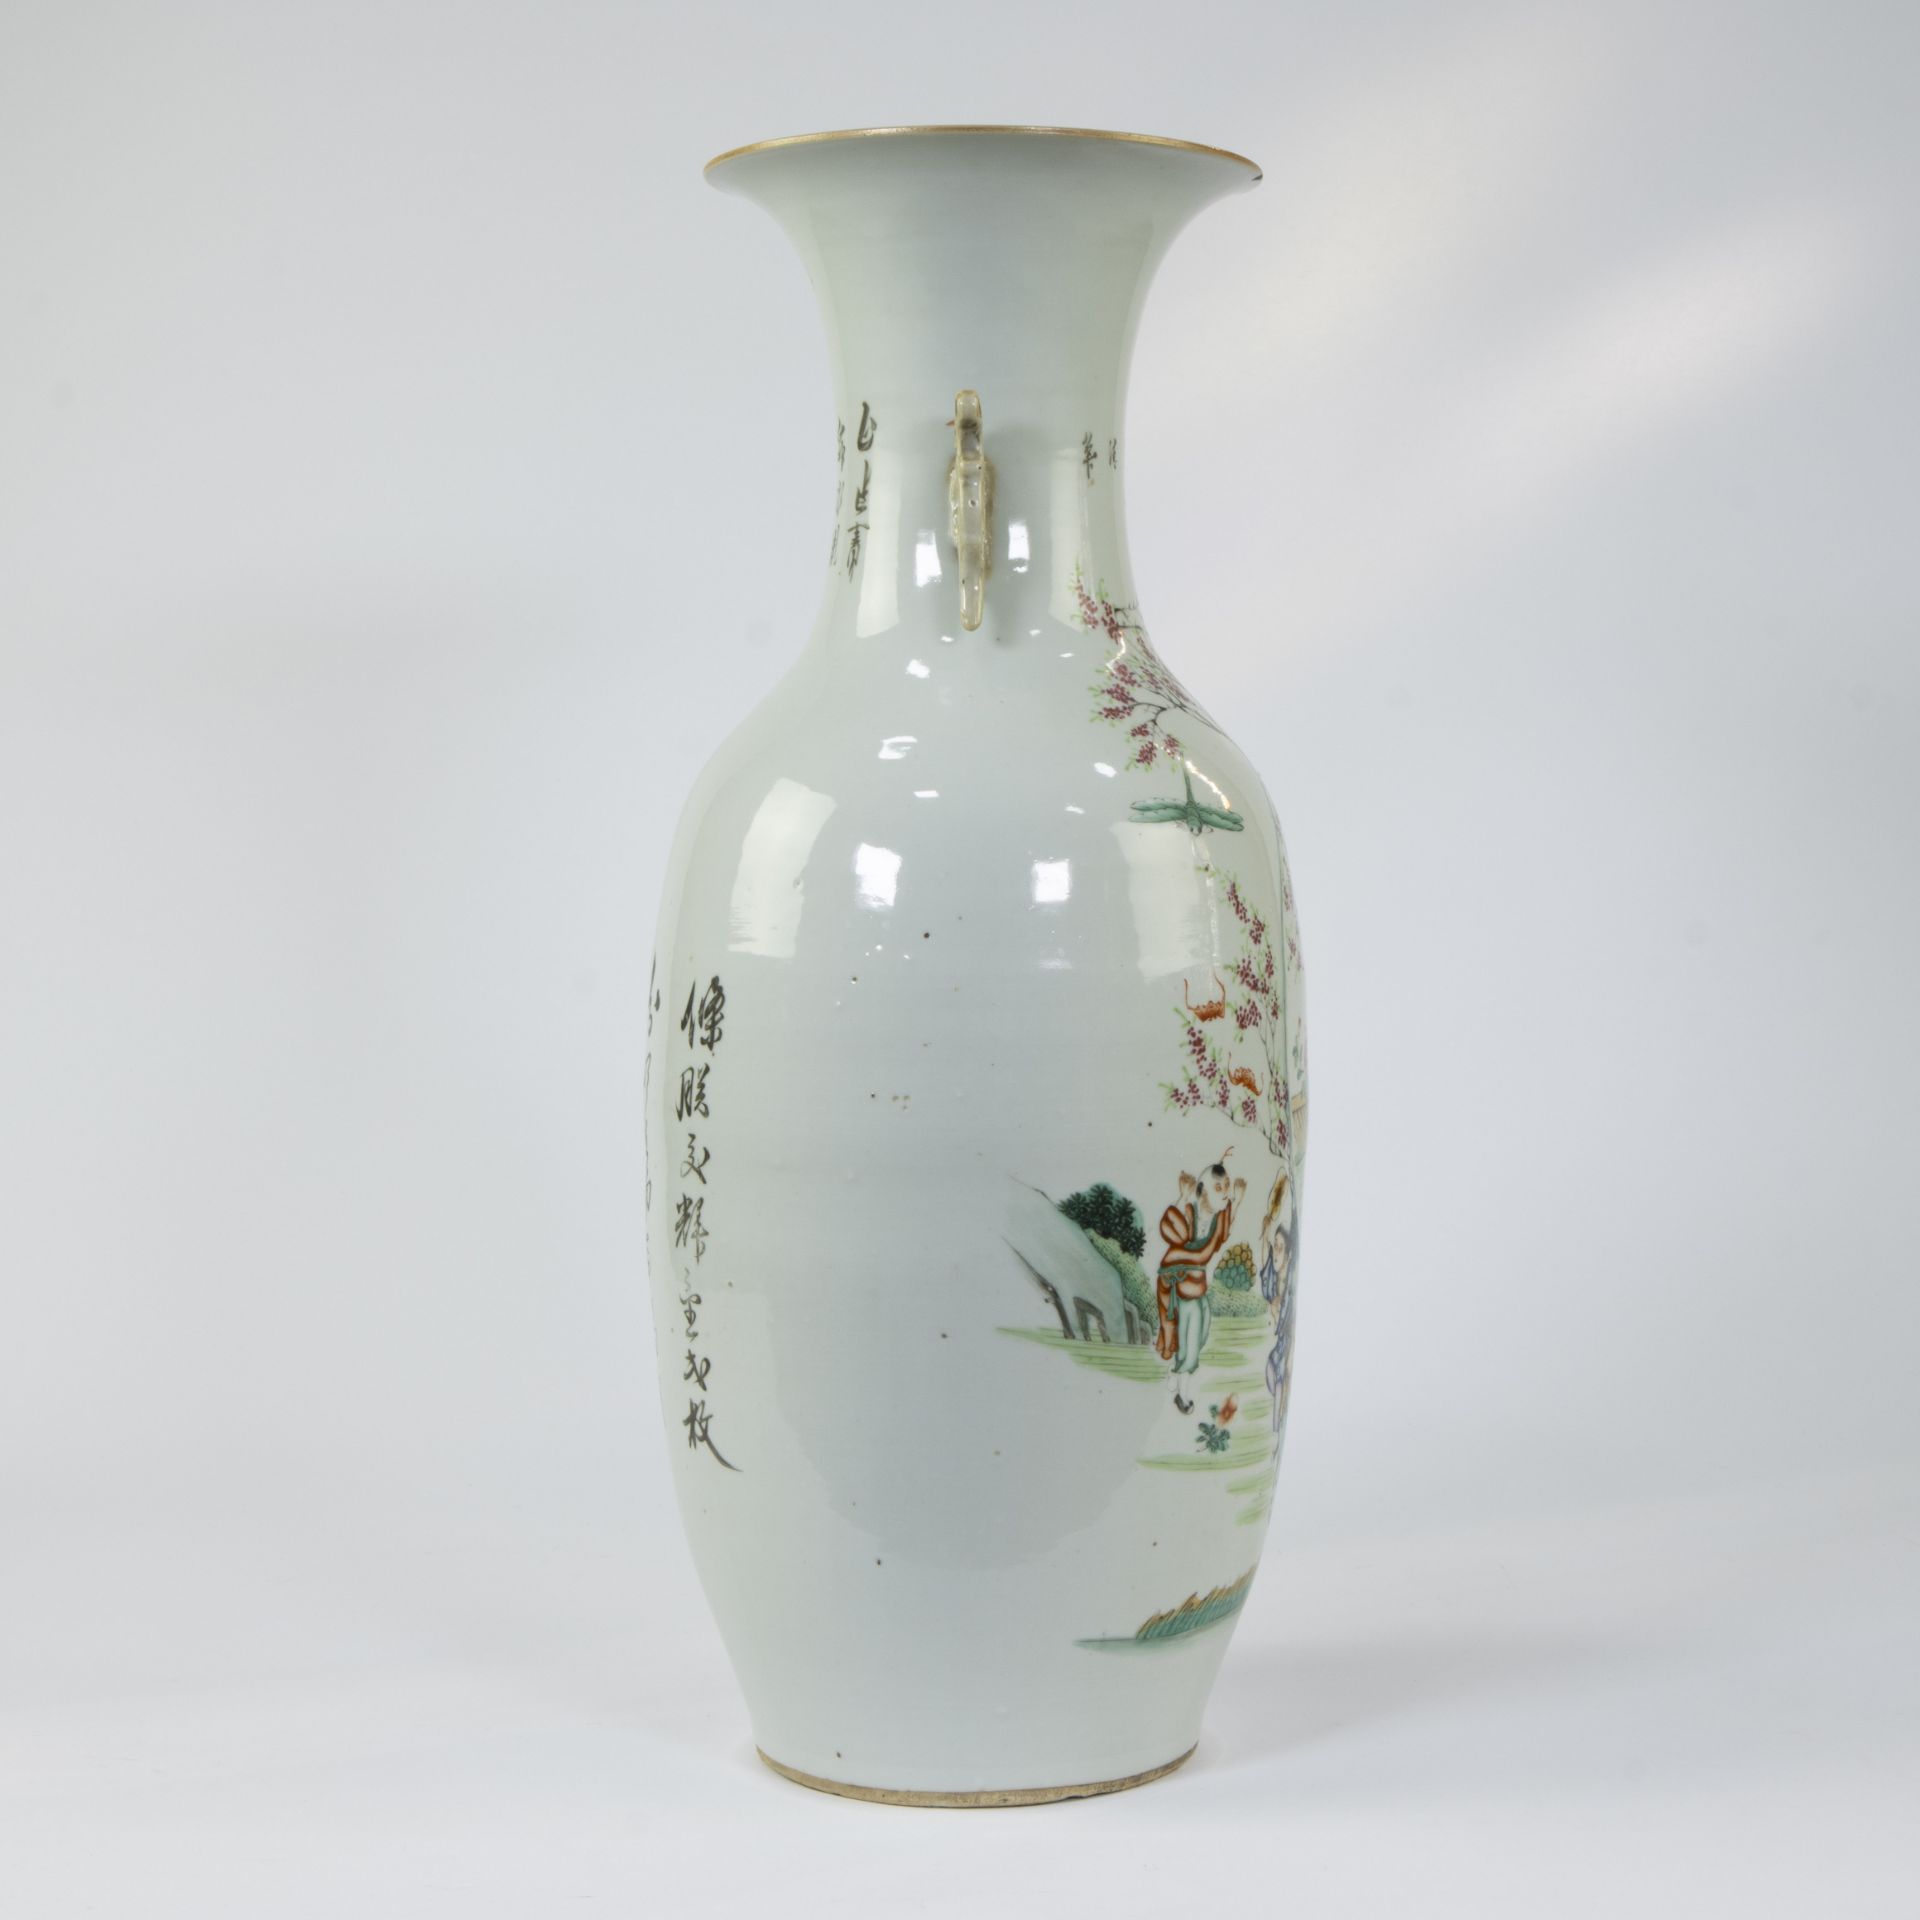 Chinese famille rose vase with decor of garden scene, 19th century - Image 4 of 6